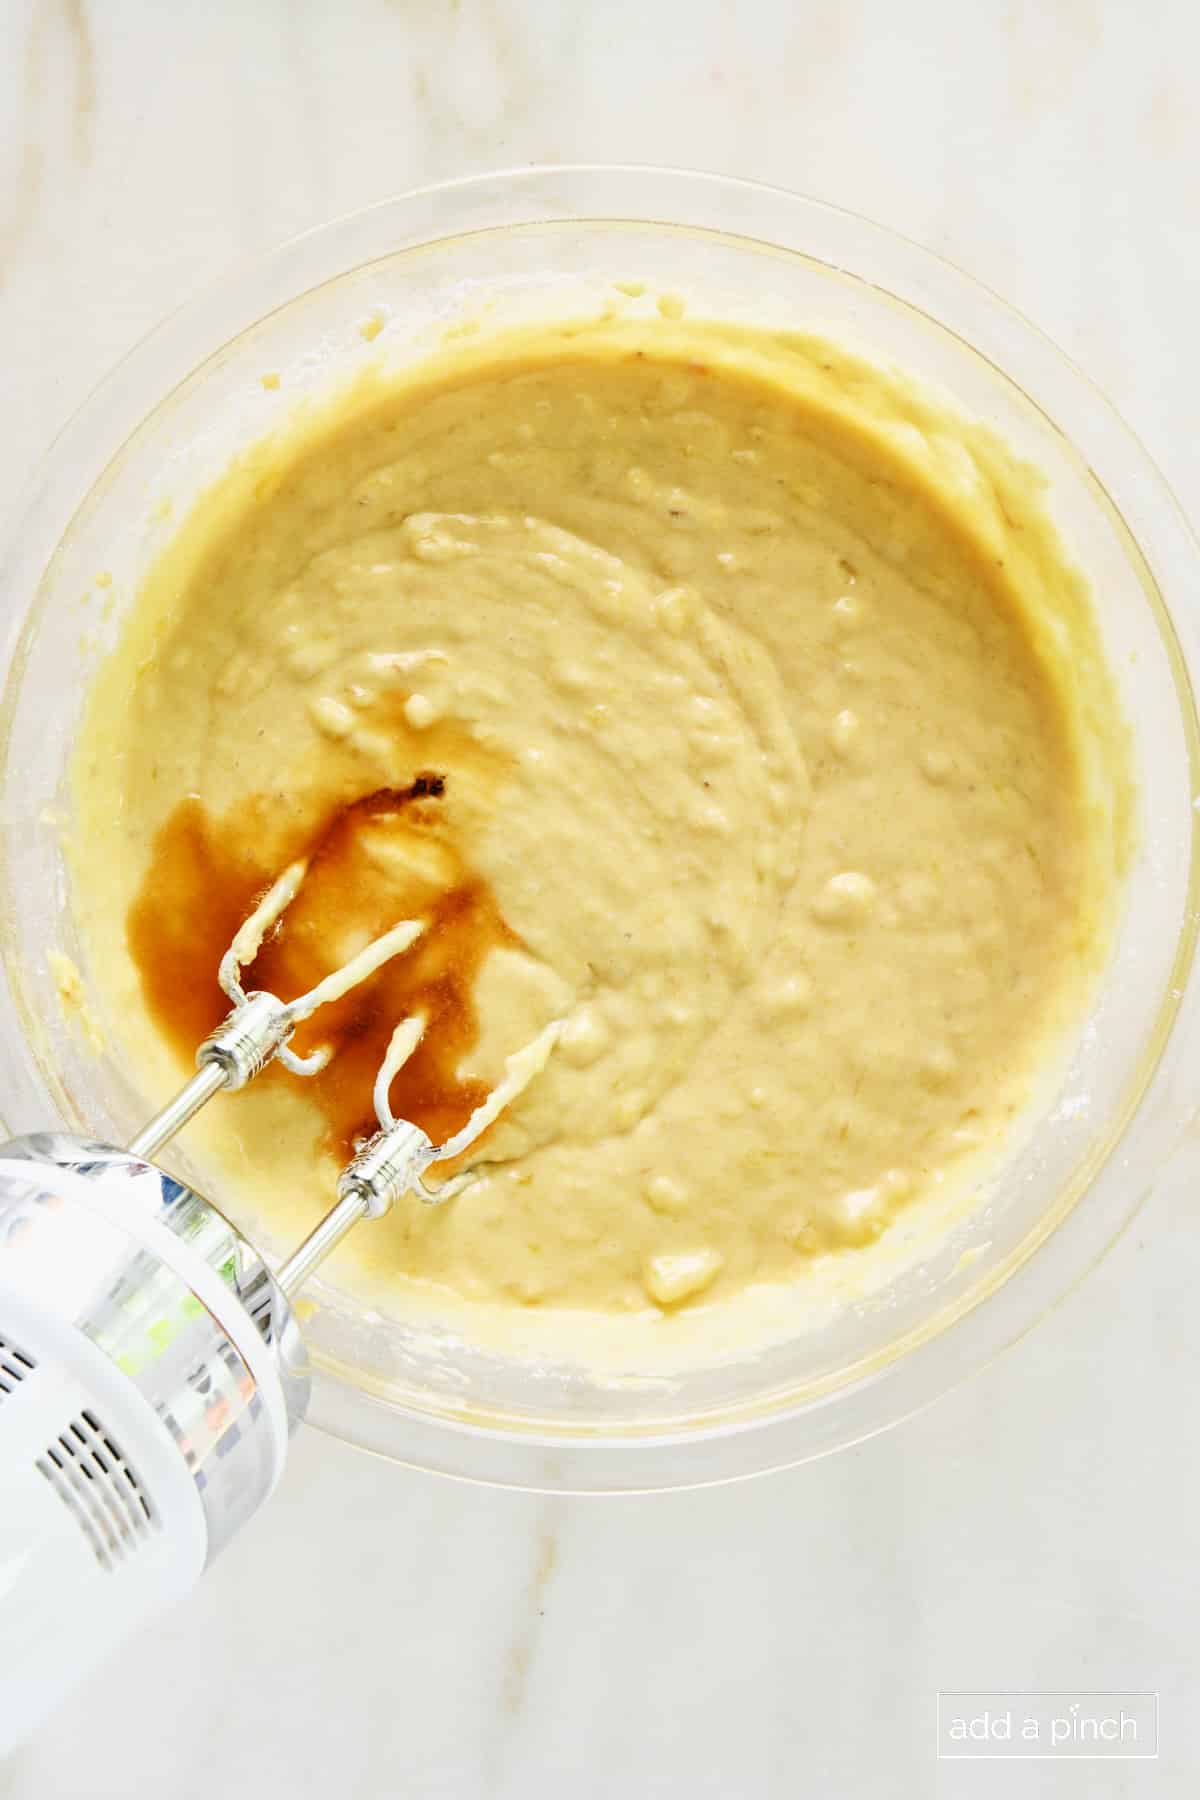 Vanilla extract being mixed into banana muffin batter in a glass bowl with a hand mixer.